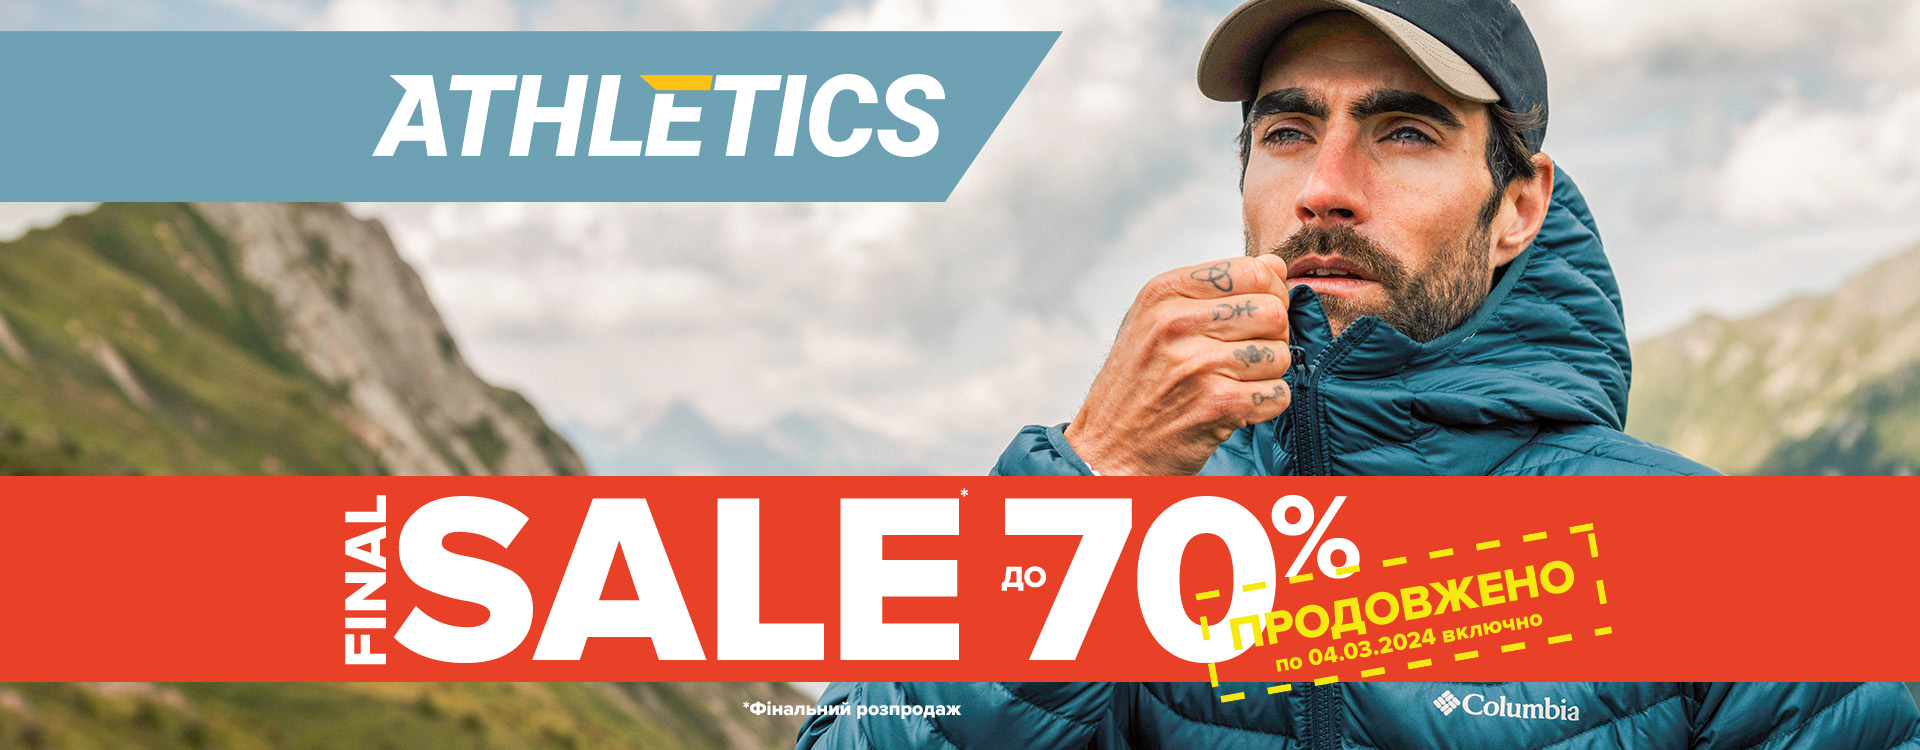 The final sale in ATHLETICS CONTINUES